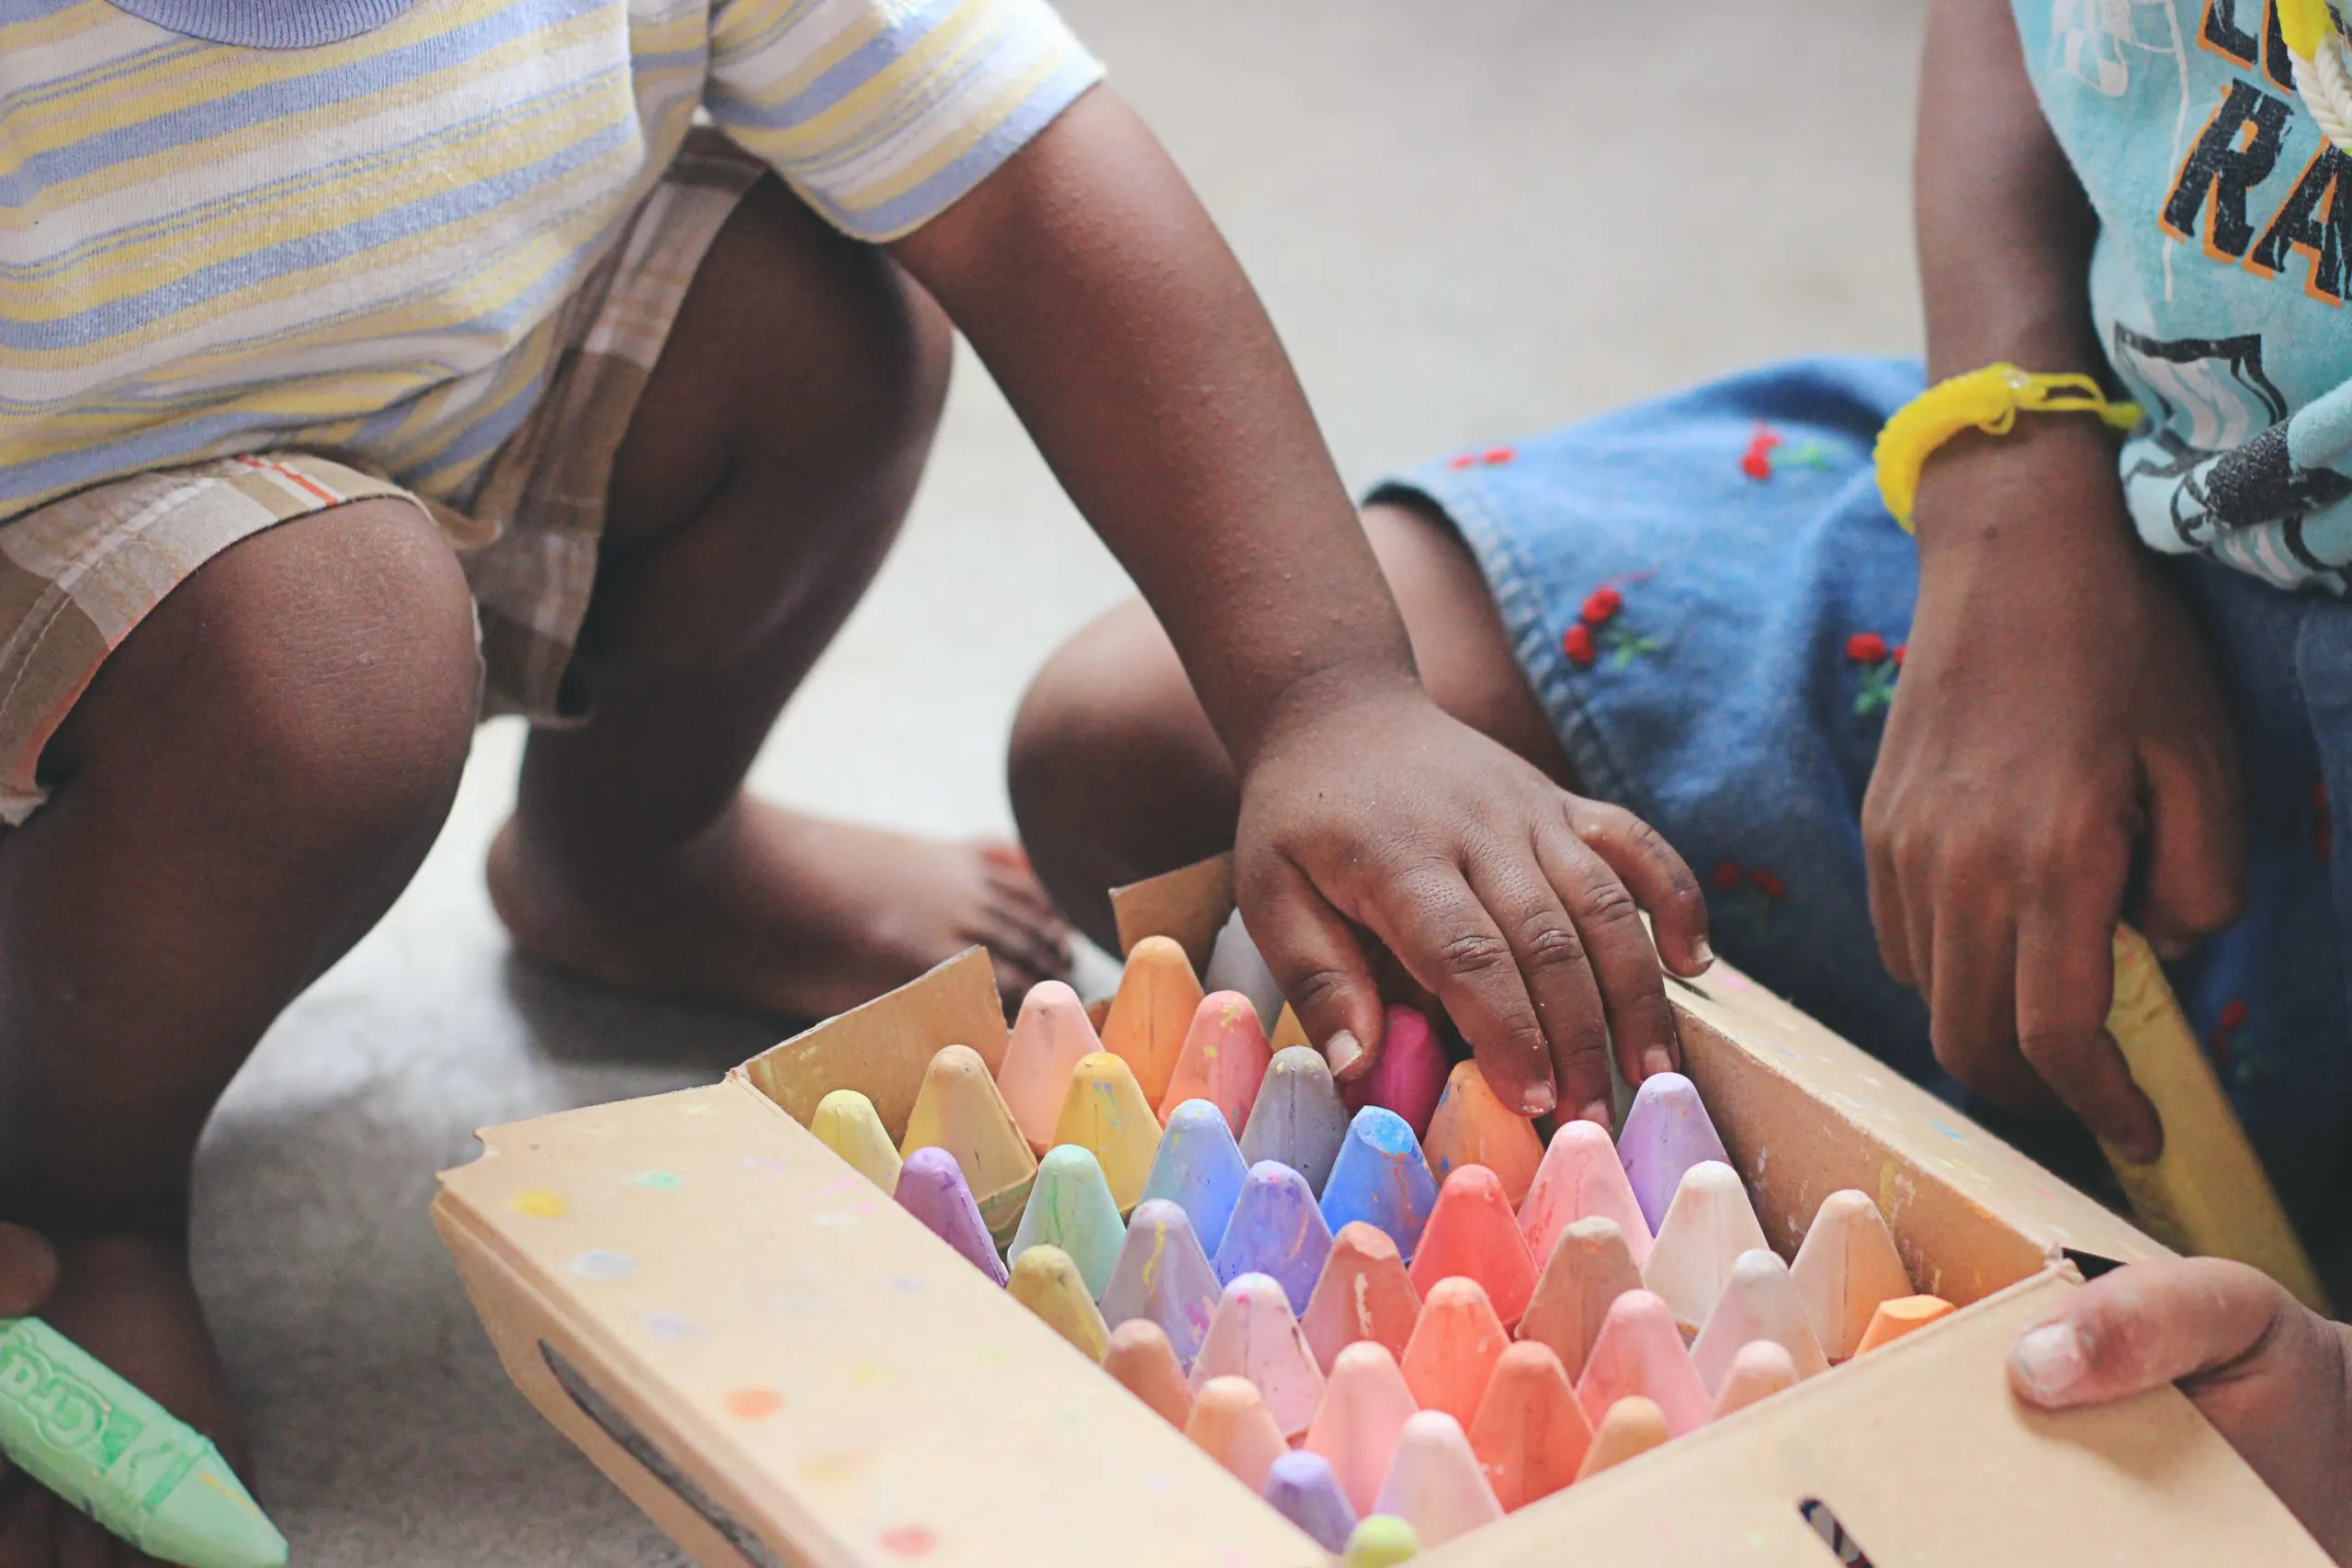 children at a head start program. Only their hands and lower half of their bodies are visible as they pick out pieces of multicolored chalk from a box on the ground. 